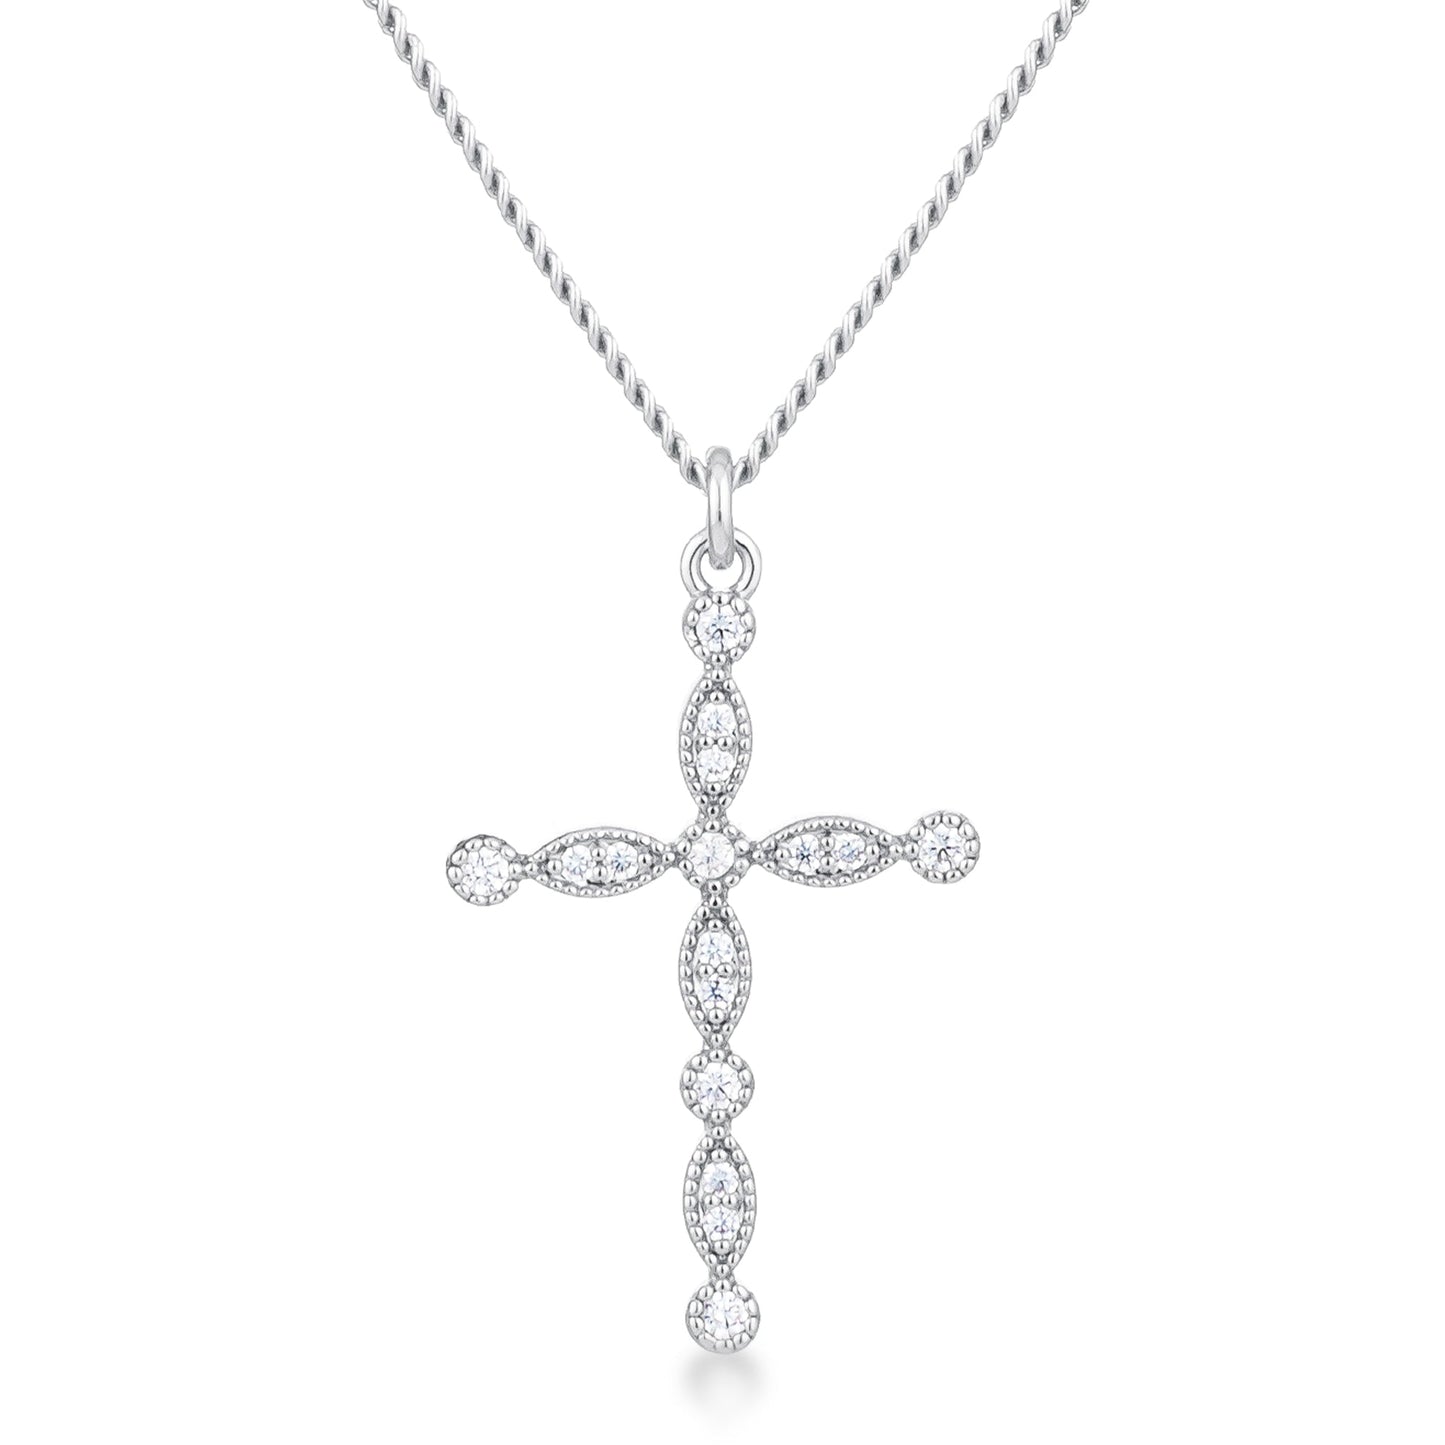 Delicate Vintage Rhodium Plated Clear CZ Cross Pendant